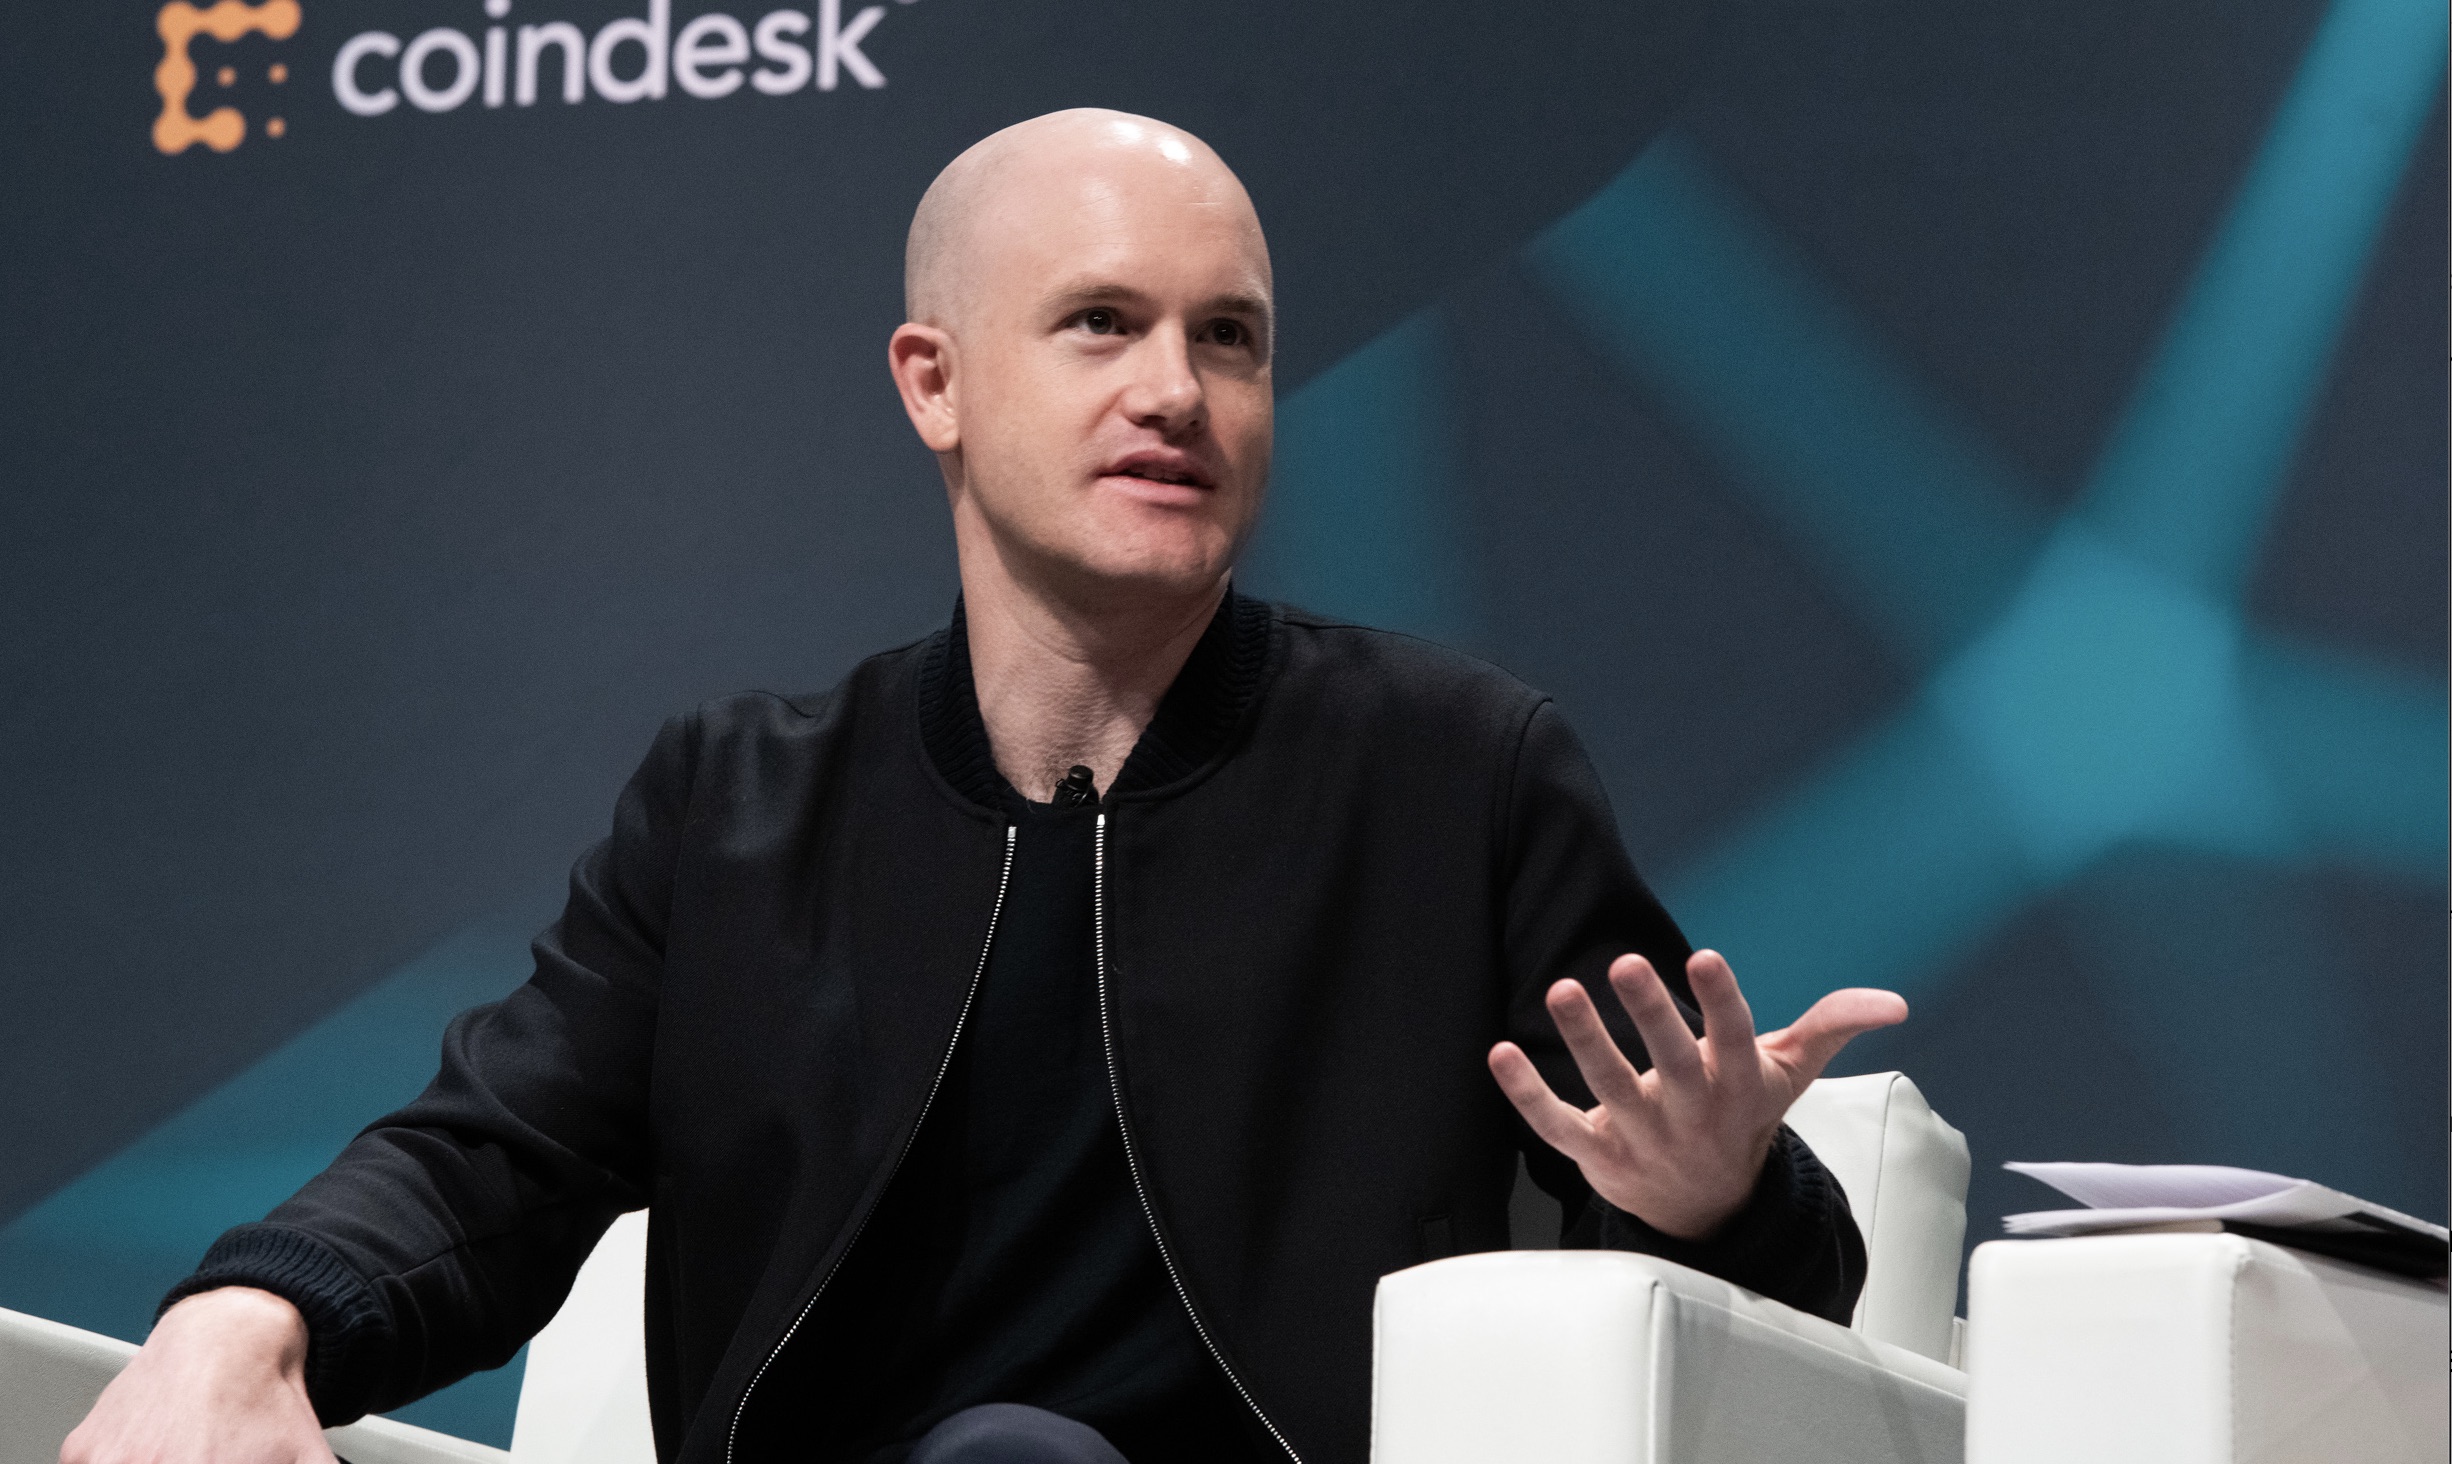 Coinbase Says It Foiled A ‘Sophisticated’ Hacking Attack